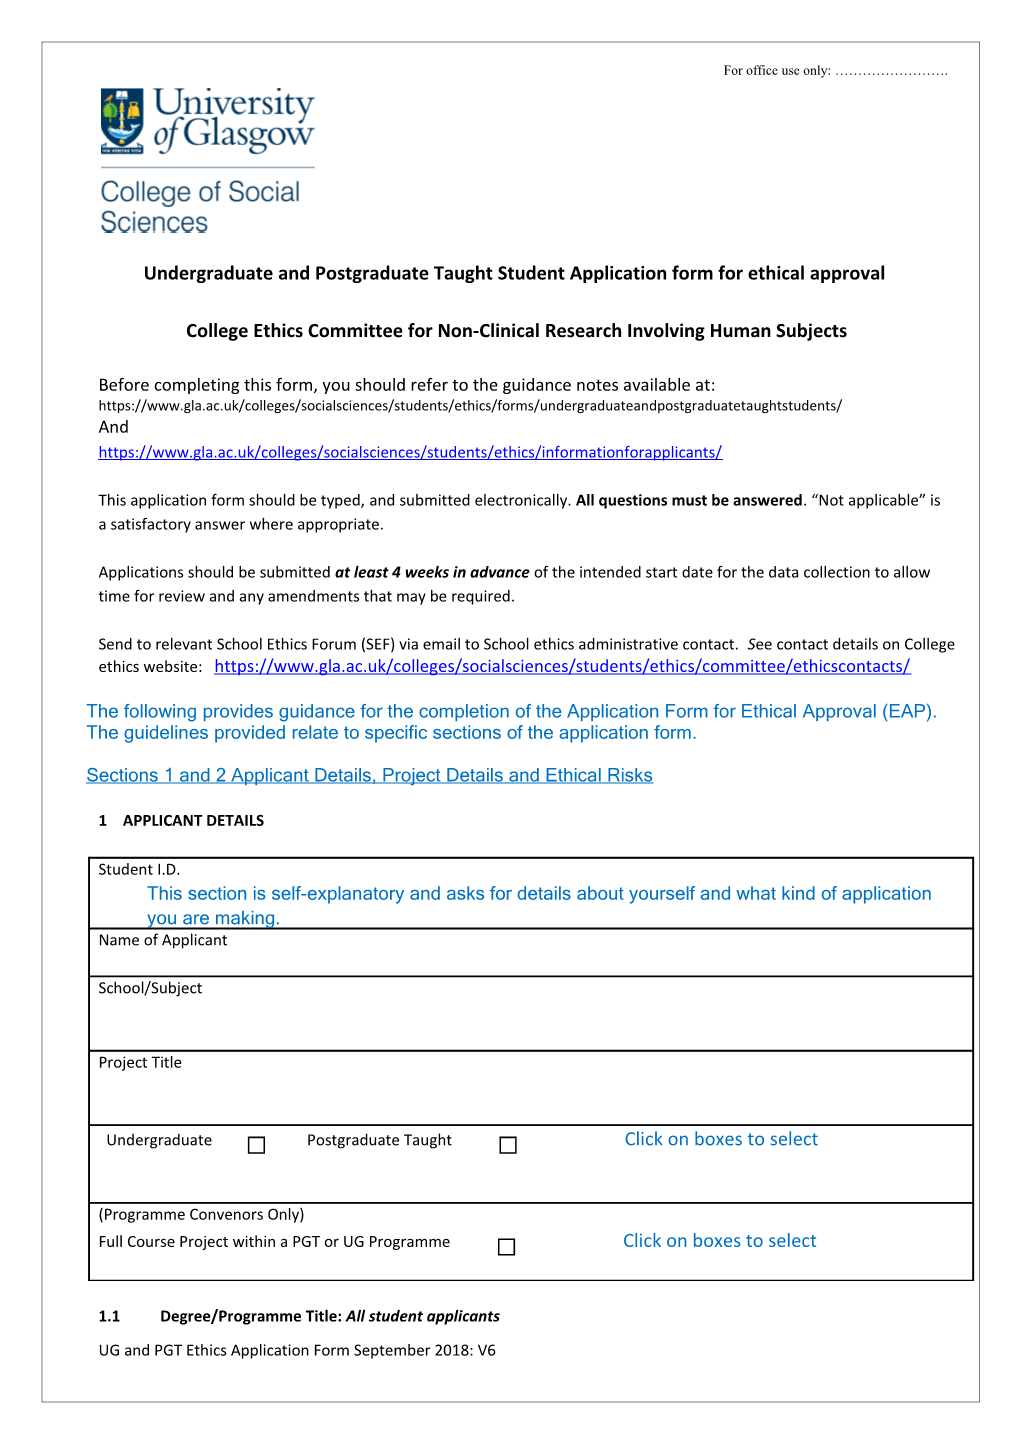 Undergraduate and Postgraduate Taught Student Application Form for Ethical Approval